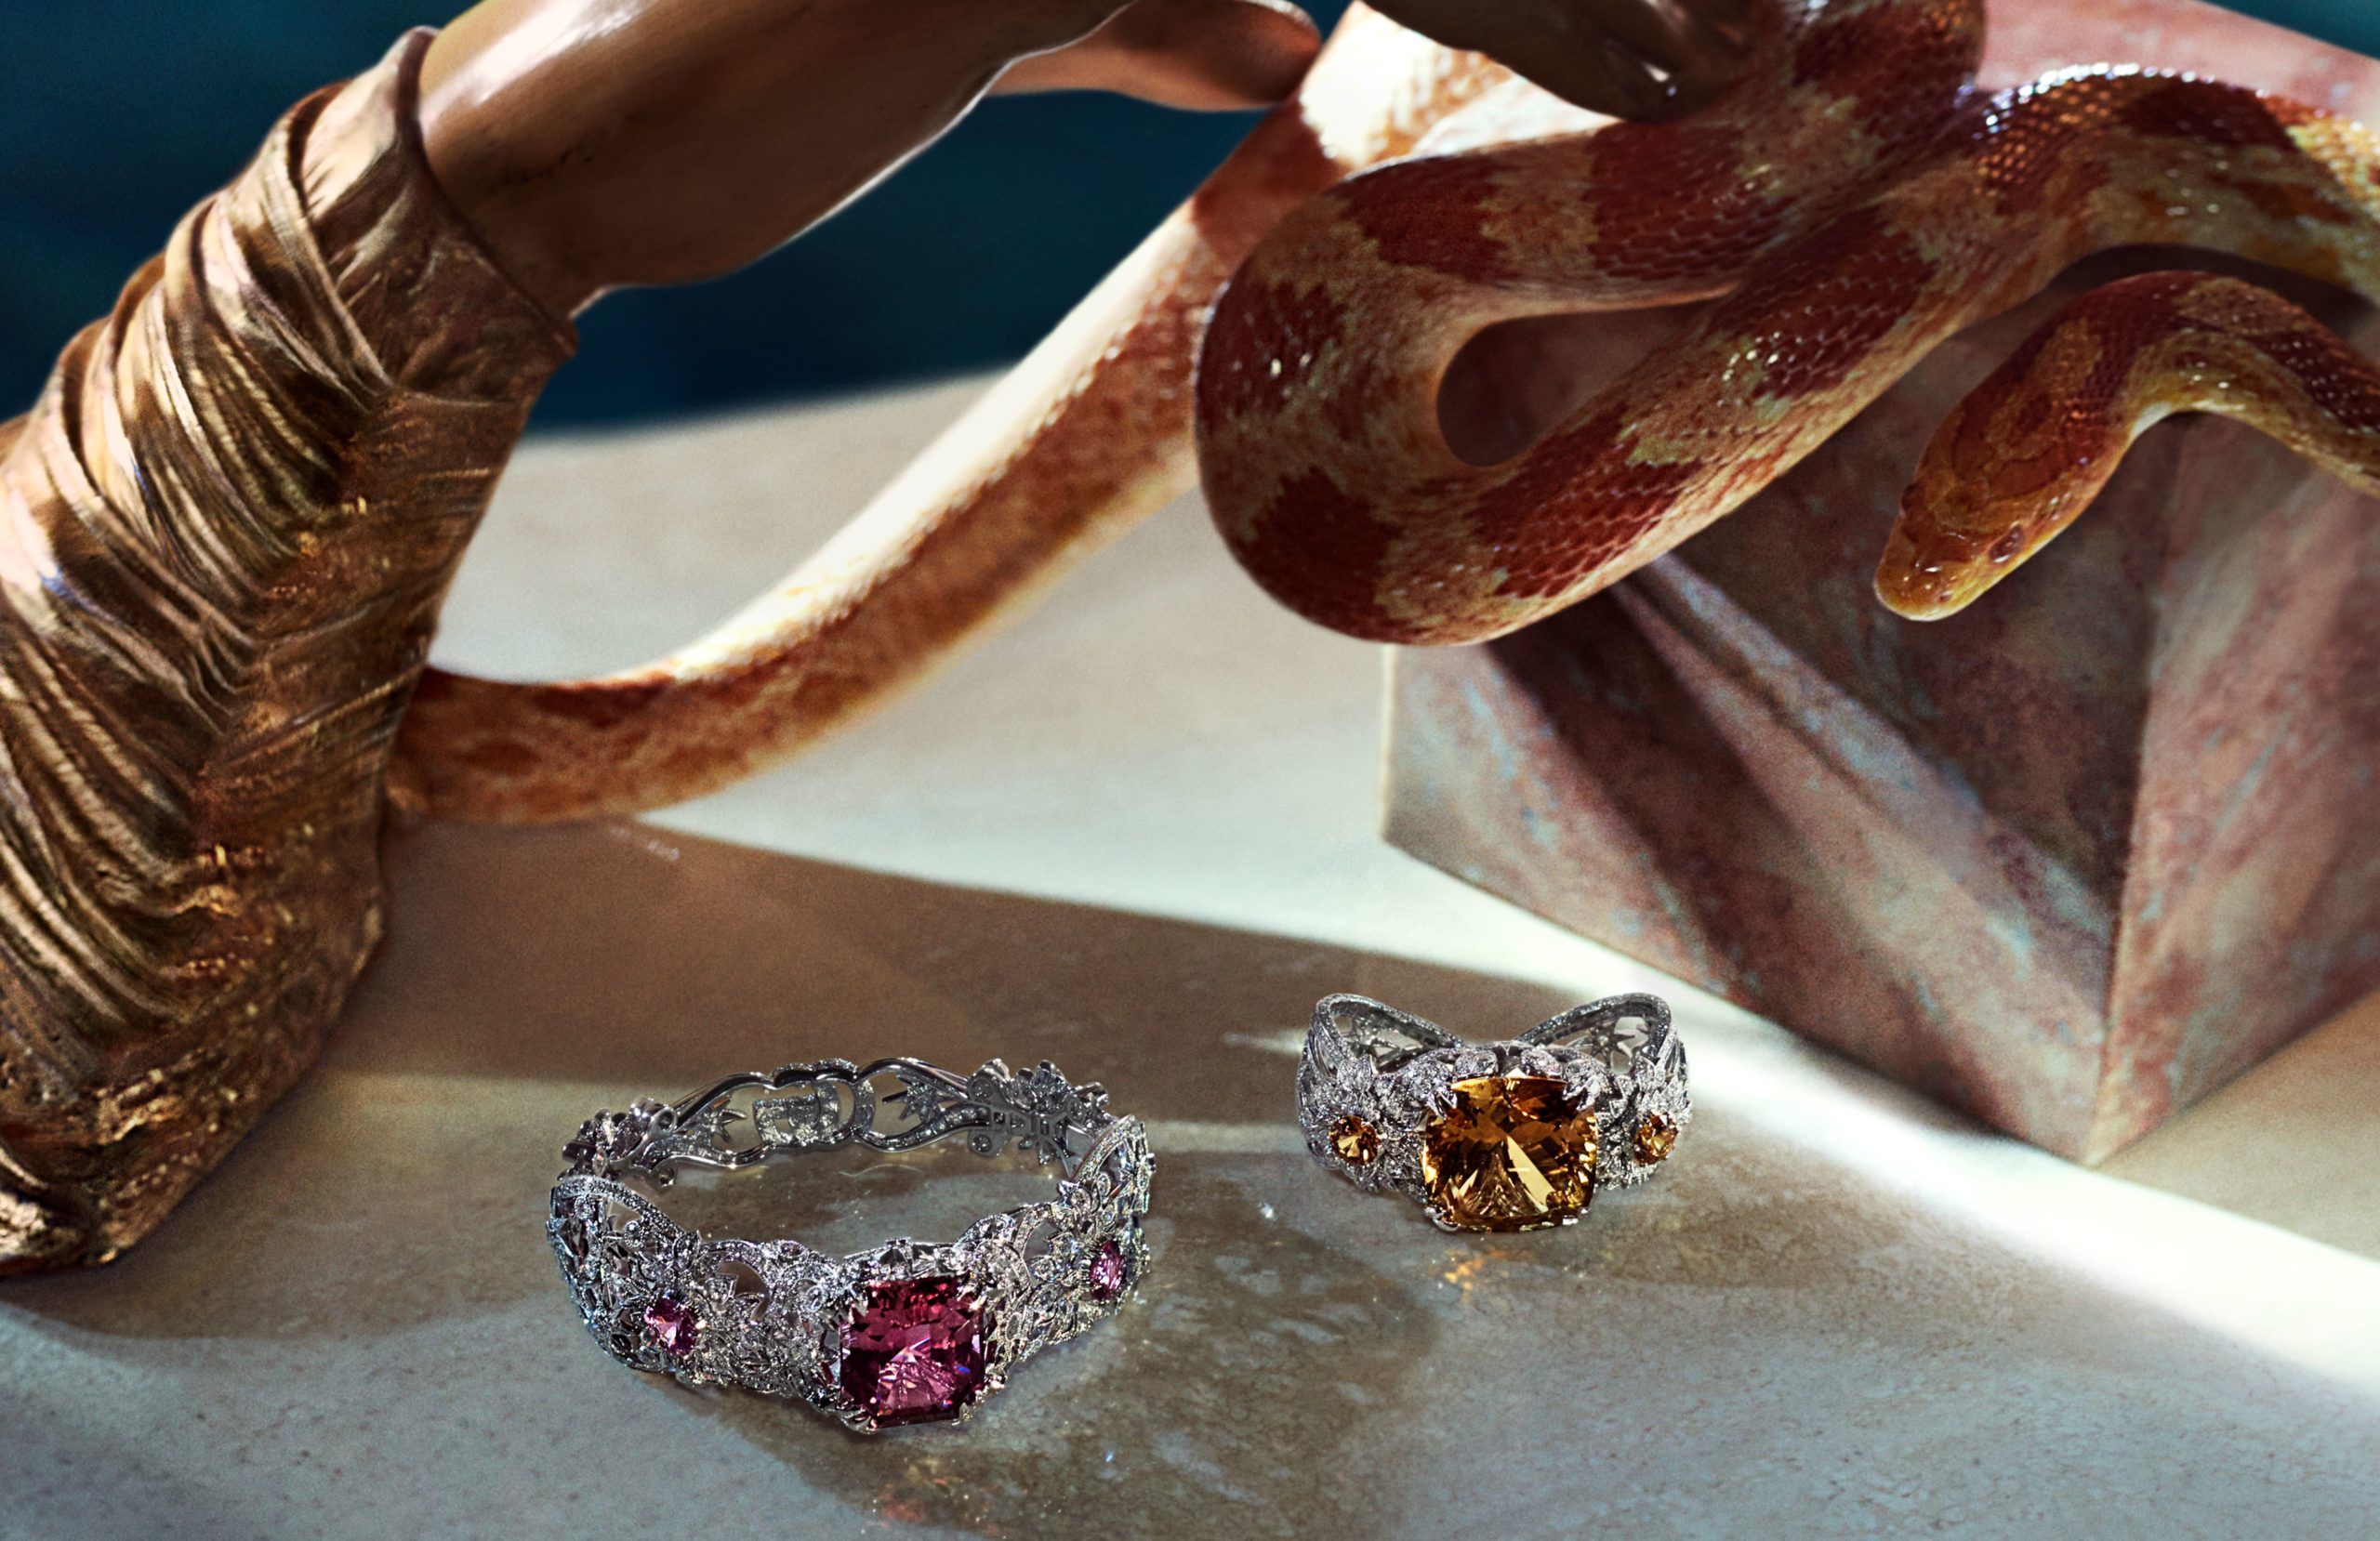 Gucci second collection of High Jewellery is inspired by ethereal